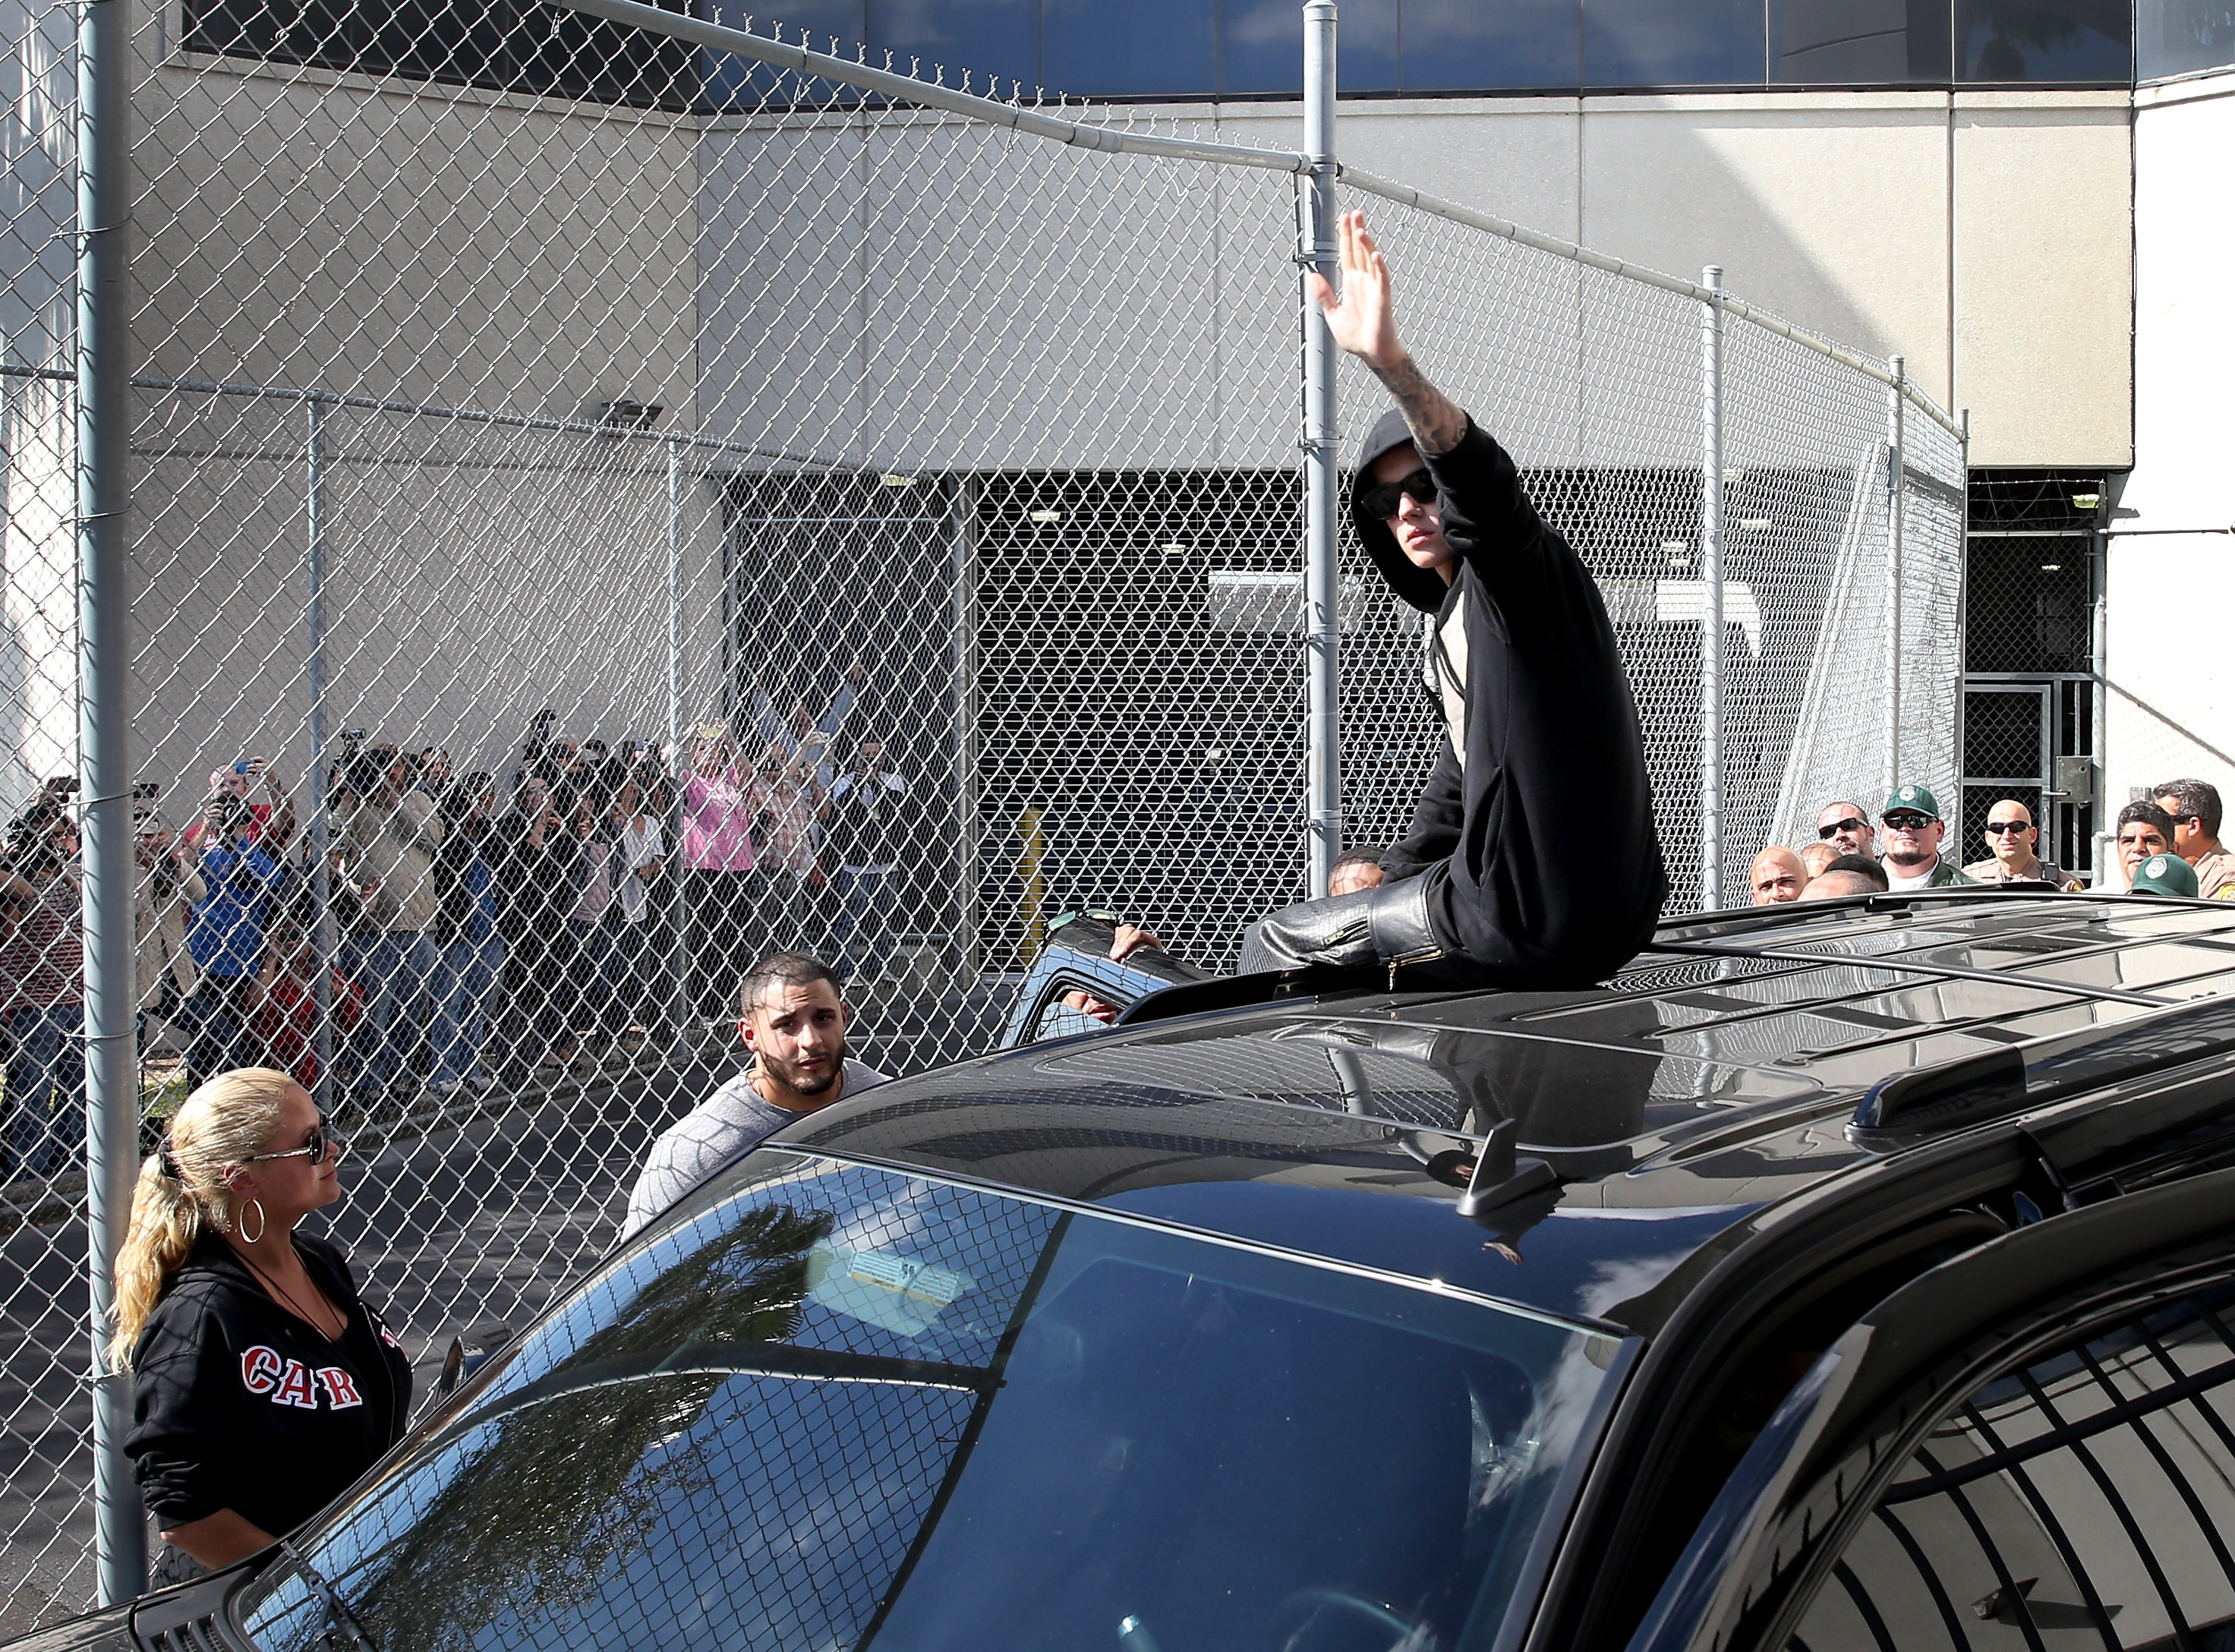  Justin Bieber waves after exiting from the Turner Guilford Knight Correctional Center on January 23, 2014 in Miami, Florida. (Photo by Joe Raedle/Getty Images)